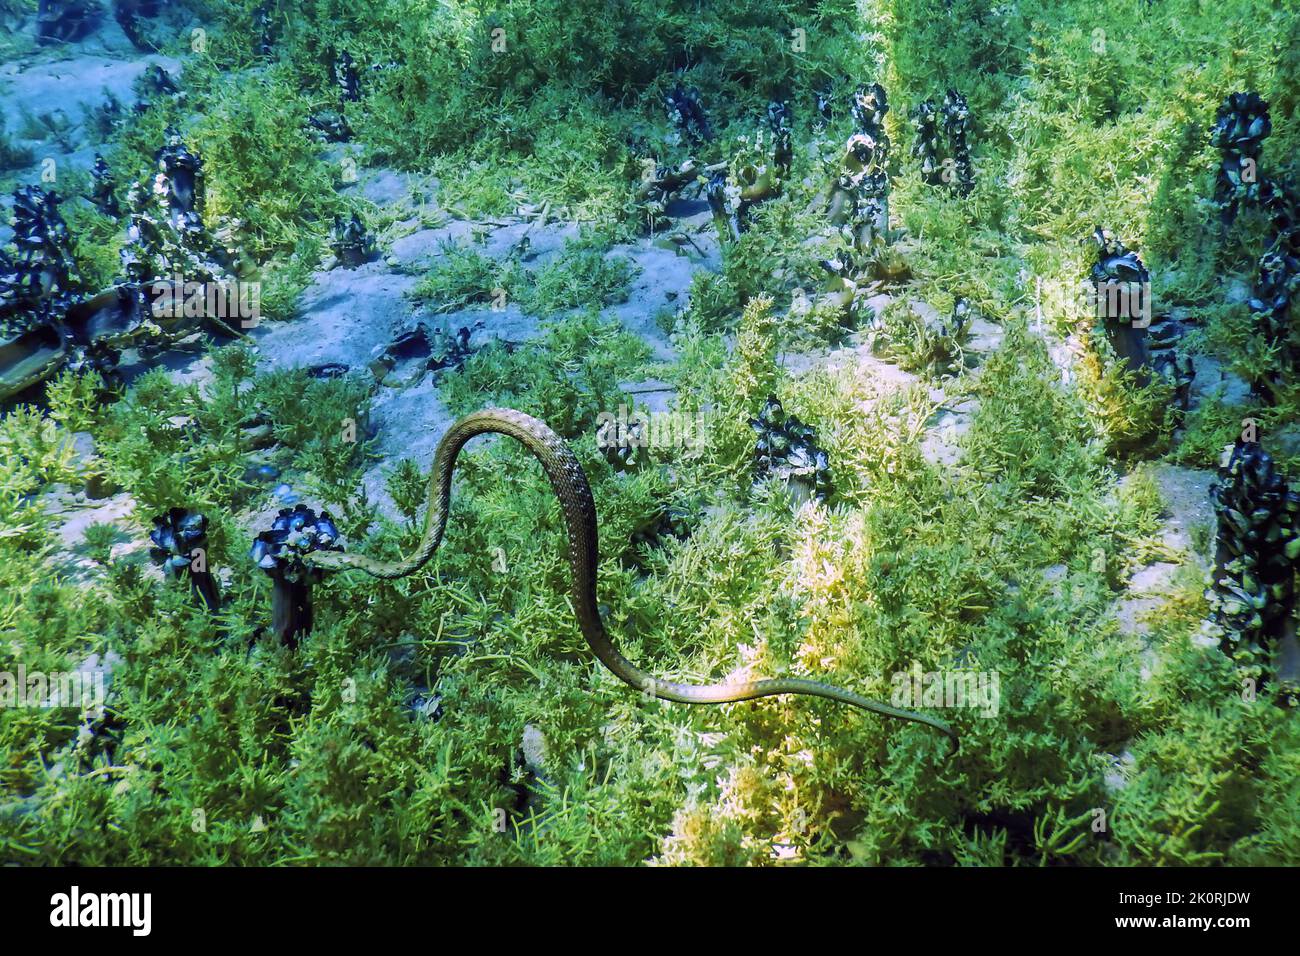 Dice Snake (Natrix tessellata) swimming in the clear water, Underwater Wildlife Stock Photo